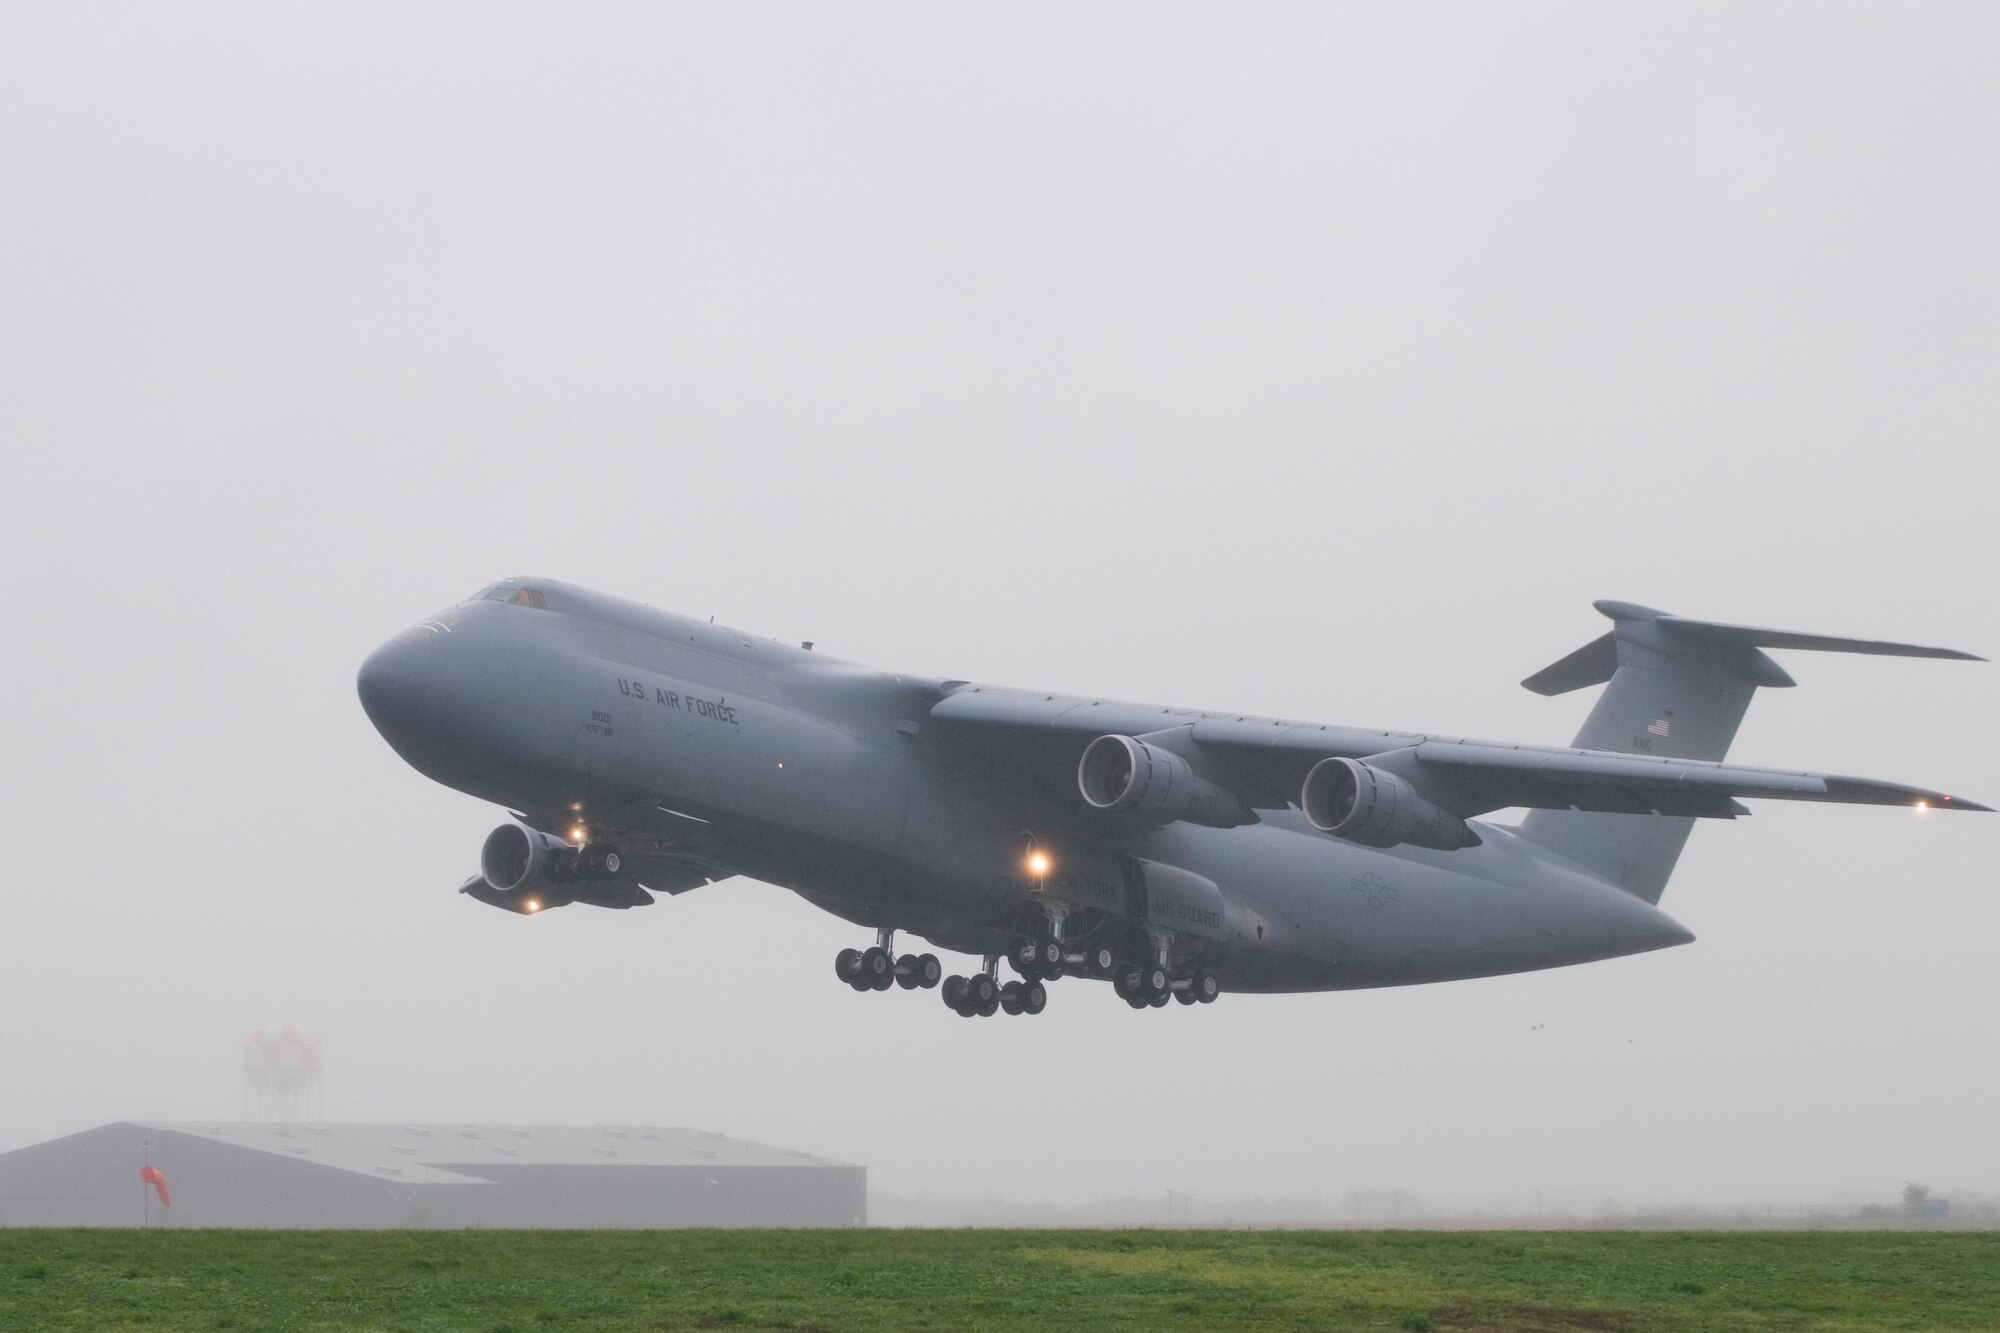 A C-5 Galaxy aircraft assigned to the 167th Airlift Wing, takes off from Shepherd Field, Martinsburg, WV on October 19, 2011. The aircraft was the seventh aircraft to launch from the unit as part of an Air Force wide "surge" exercise for the C-5 fleet. The exercise, which was testing the United States Transportation Command's ability to rapidly provide strategic airlift in support of contengencies around the world, took place October 17-21 and included 41 C-5 aircraft from the Air Force Active, Reserve, and Guard components. (National Guard photo by Master Sgt. Emily Beightol-Deyerle)